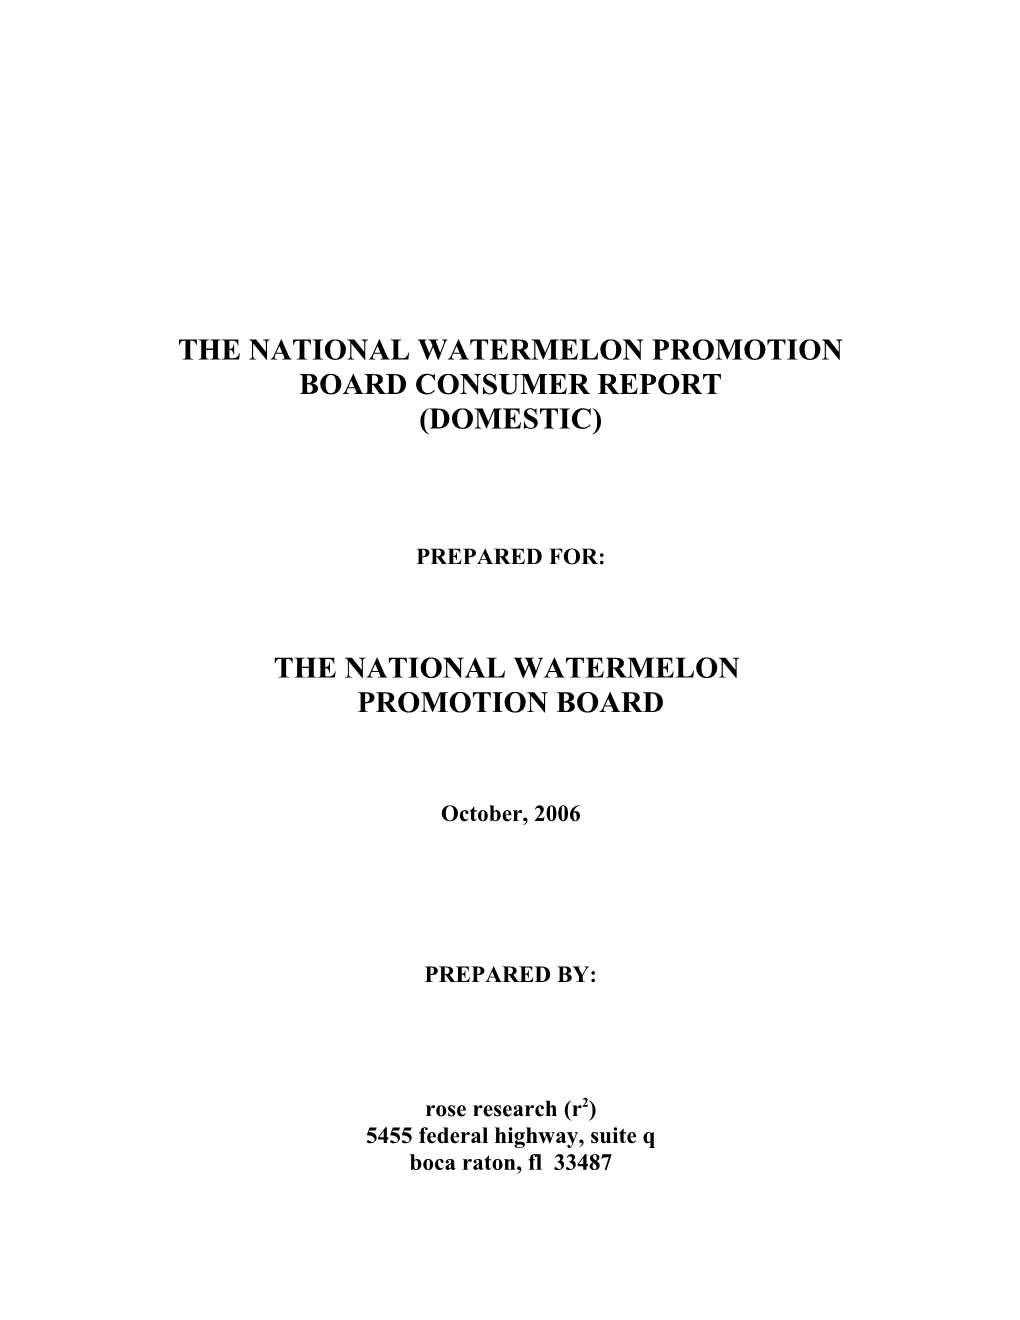 The National Watermelon Promotion Board Consumer Report